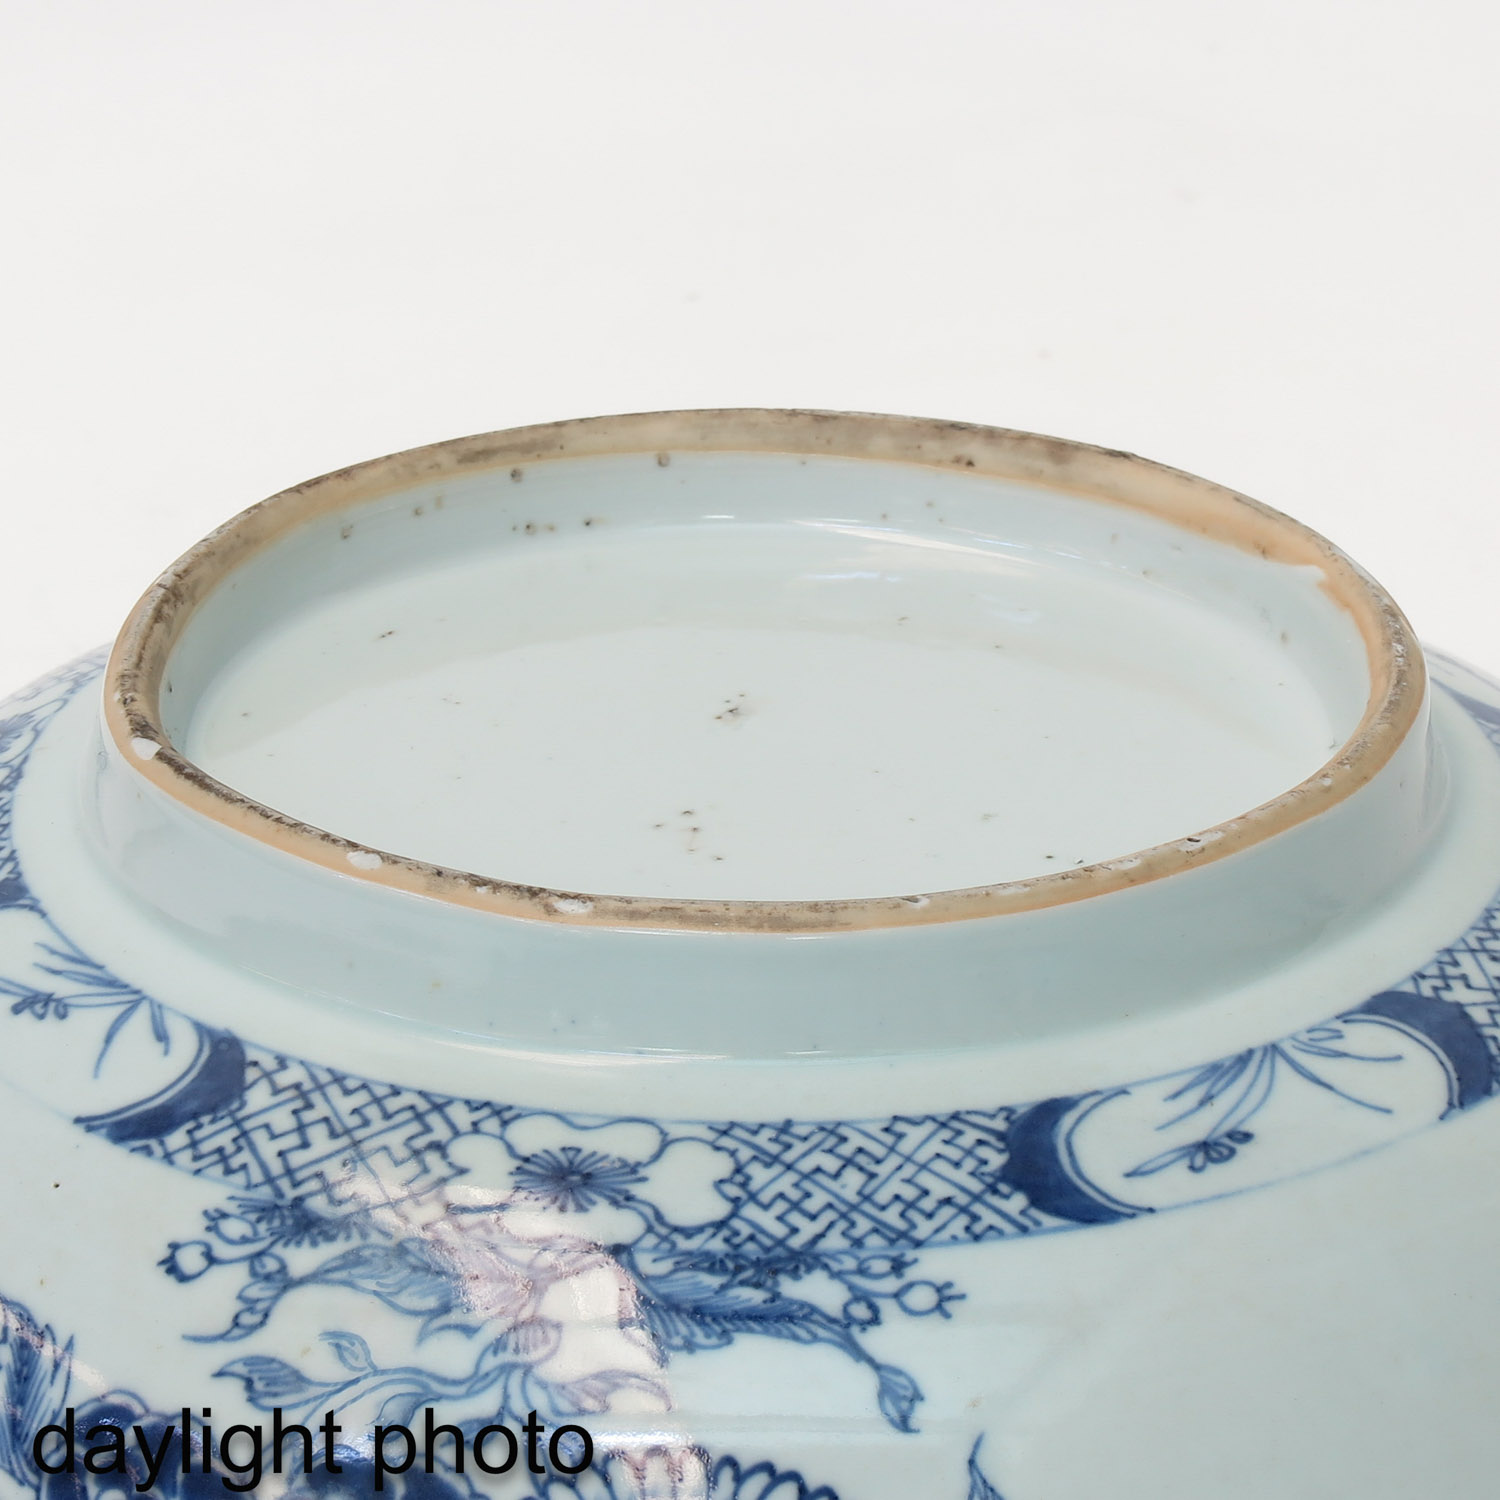 A Large Blue and White Serving Bowl - Image 8 of 9